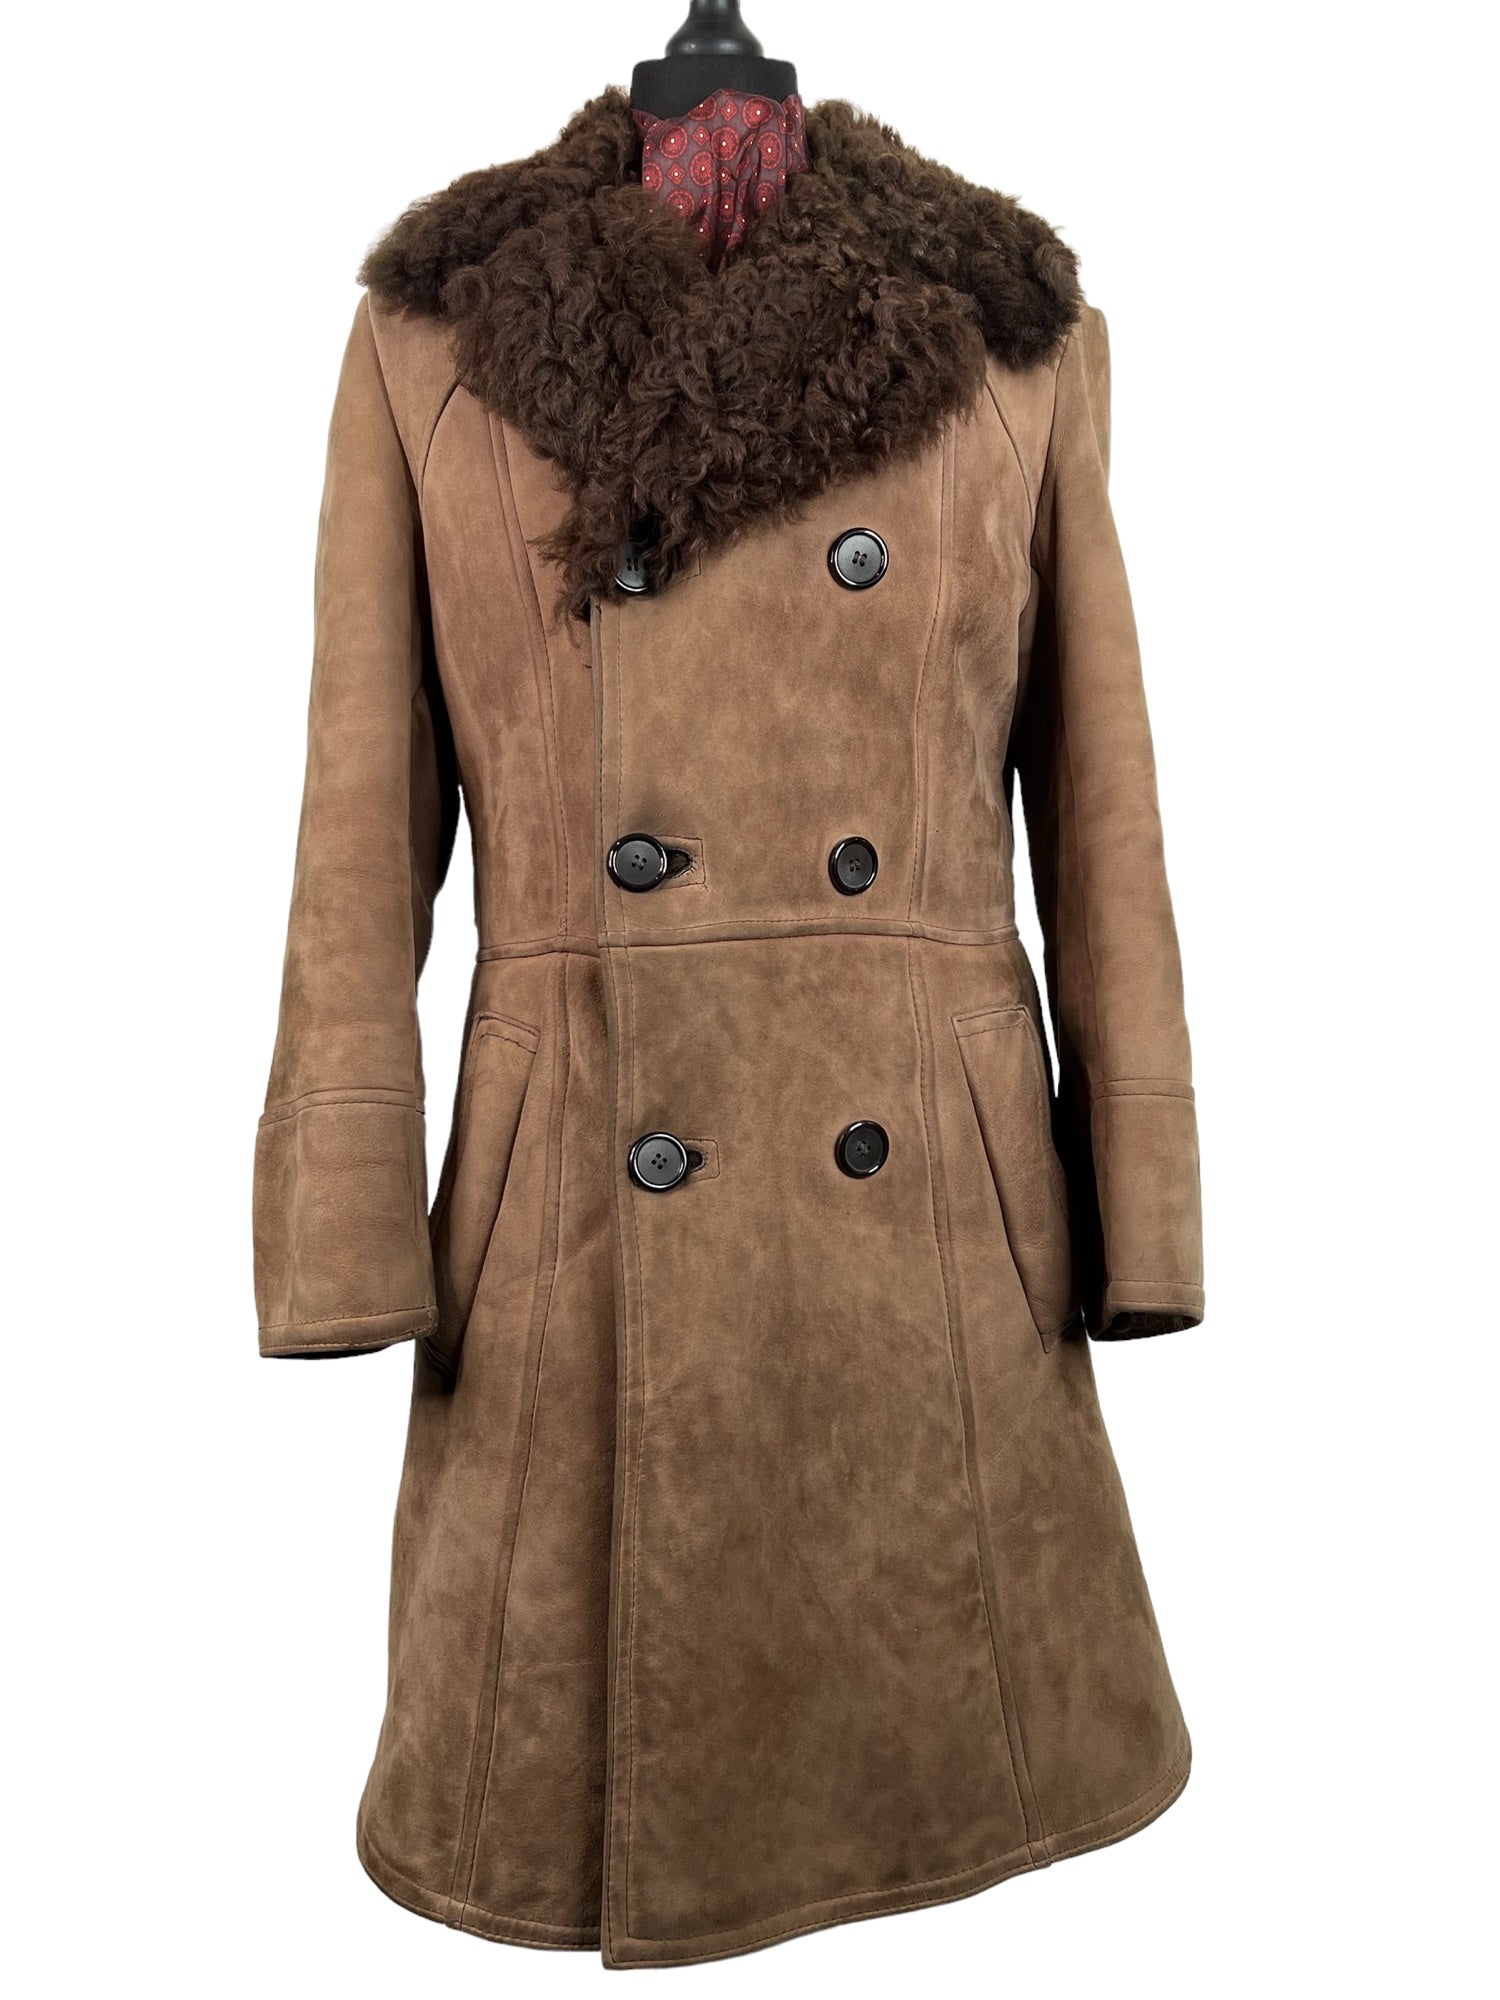 womens  Winter Coat  winter  vintage  Urban Village Vintage  UK  suede coat  style  sheepskin lining  Sheepskin  Rare  mens coat  mens  long length coat  long length  Jacket  fashion  double breasted coat  coat  clothing  clothes  brown  autumnal  autumn  70s  70  1970s